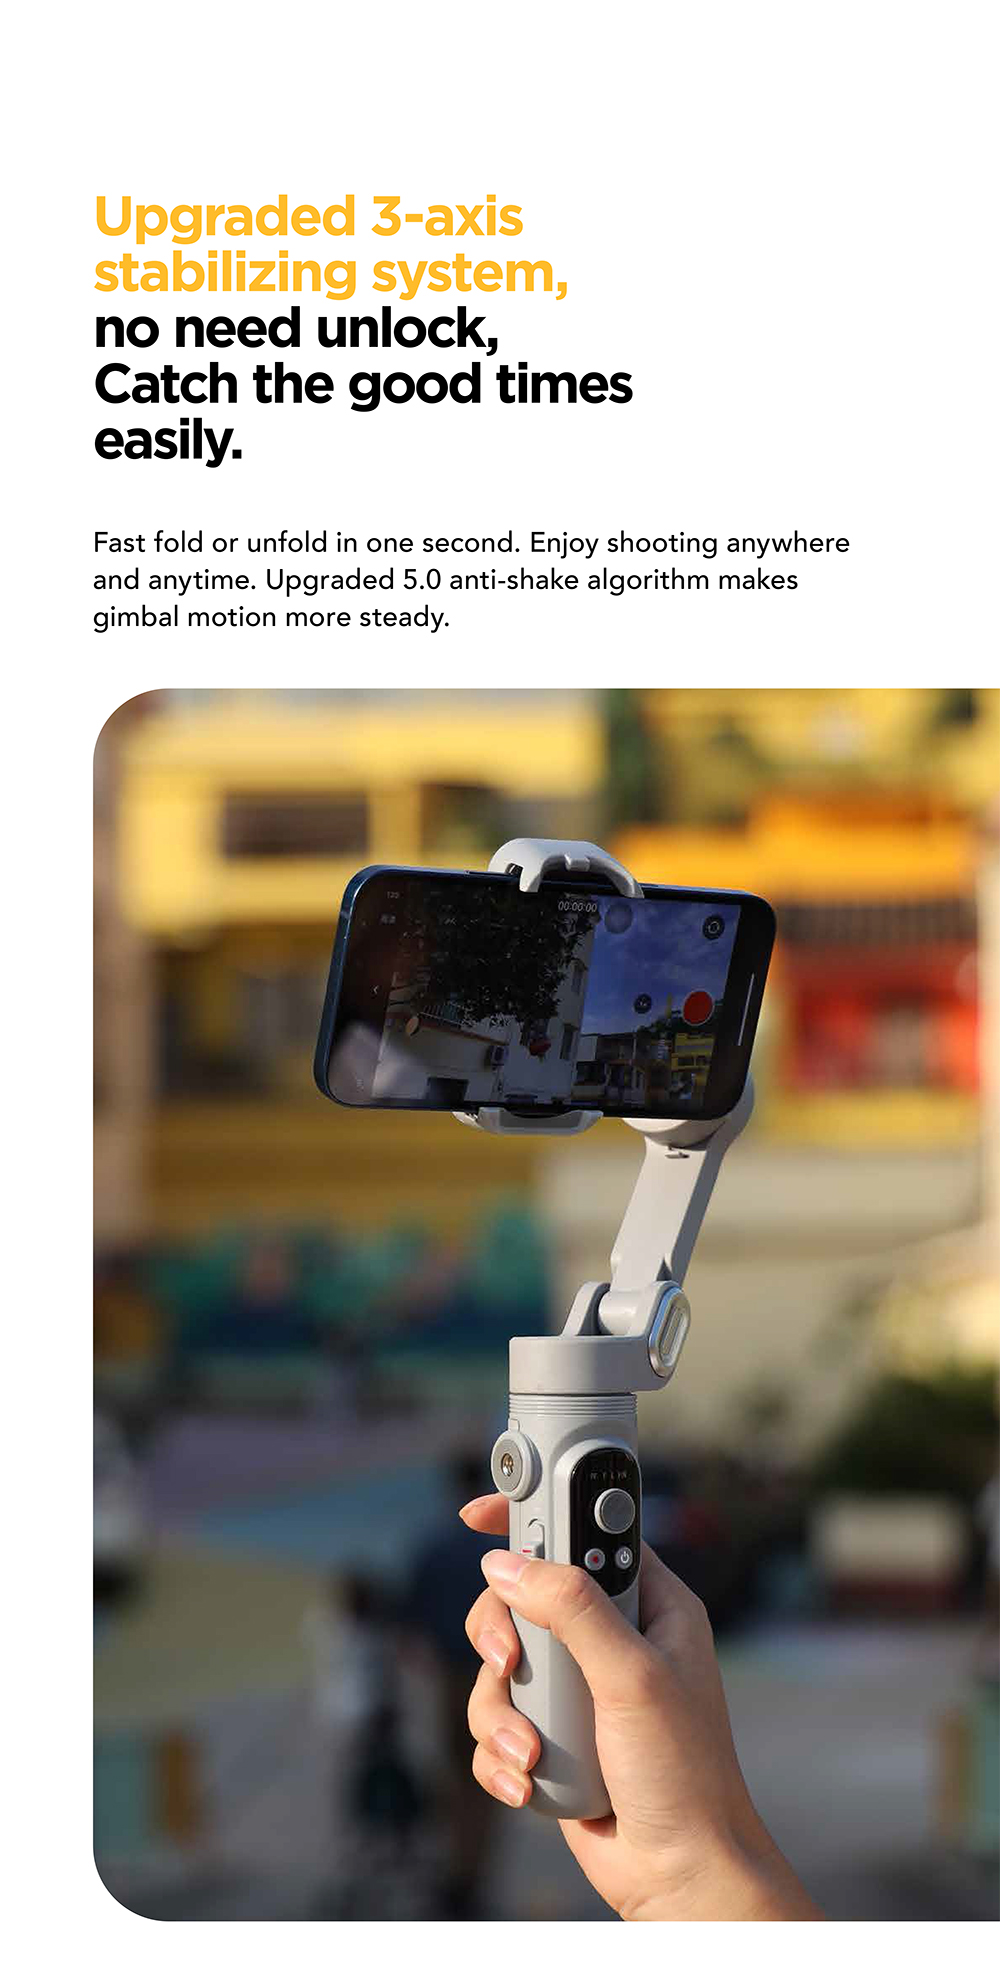 Aochuan Smart X 3-axis Foldable Handheld Gimbal Stabilizer with Fill Light for Smart Phone Action Camera Vlog Video Photography